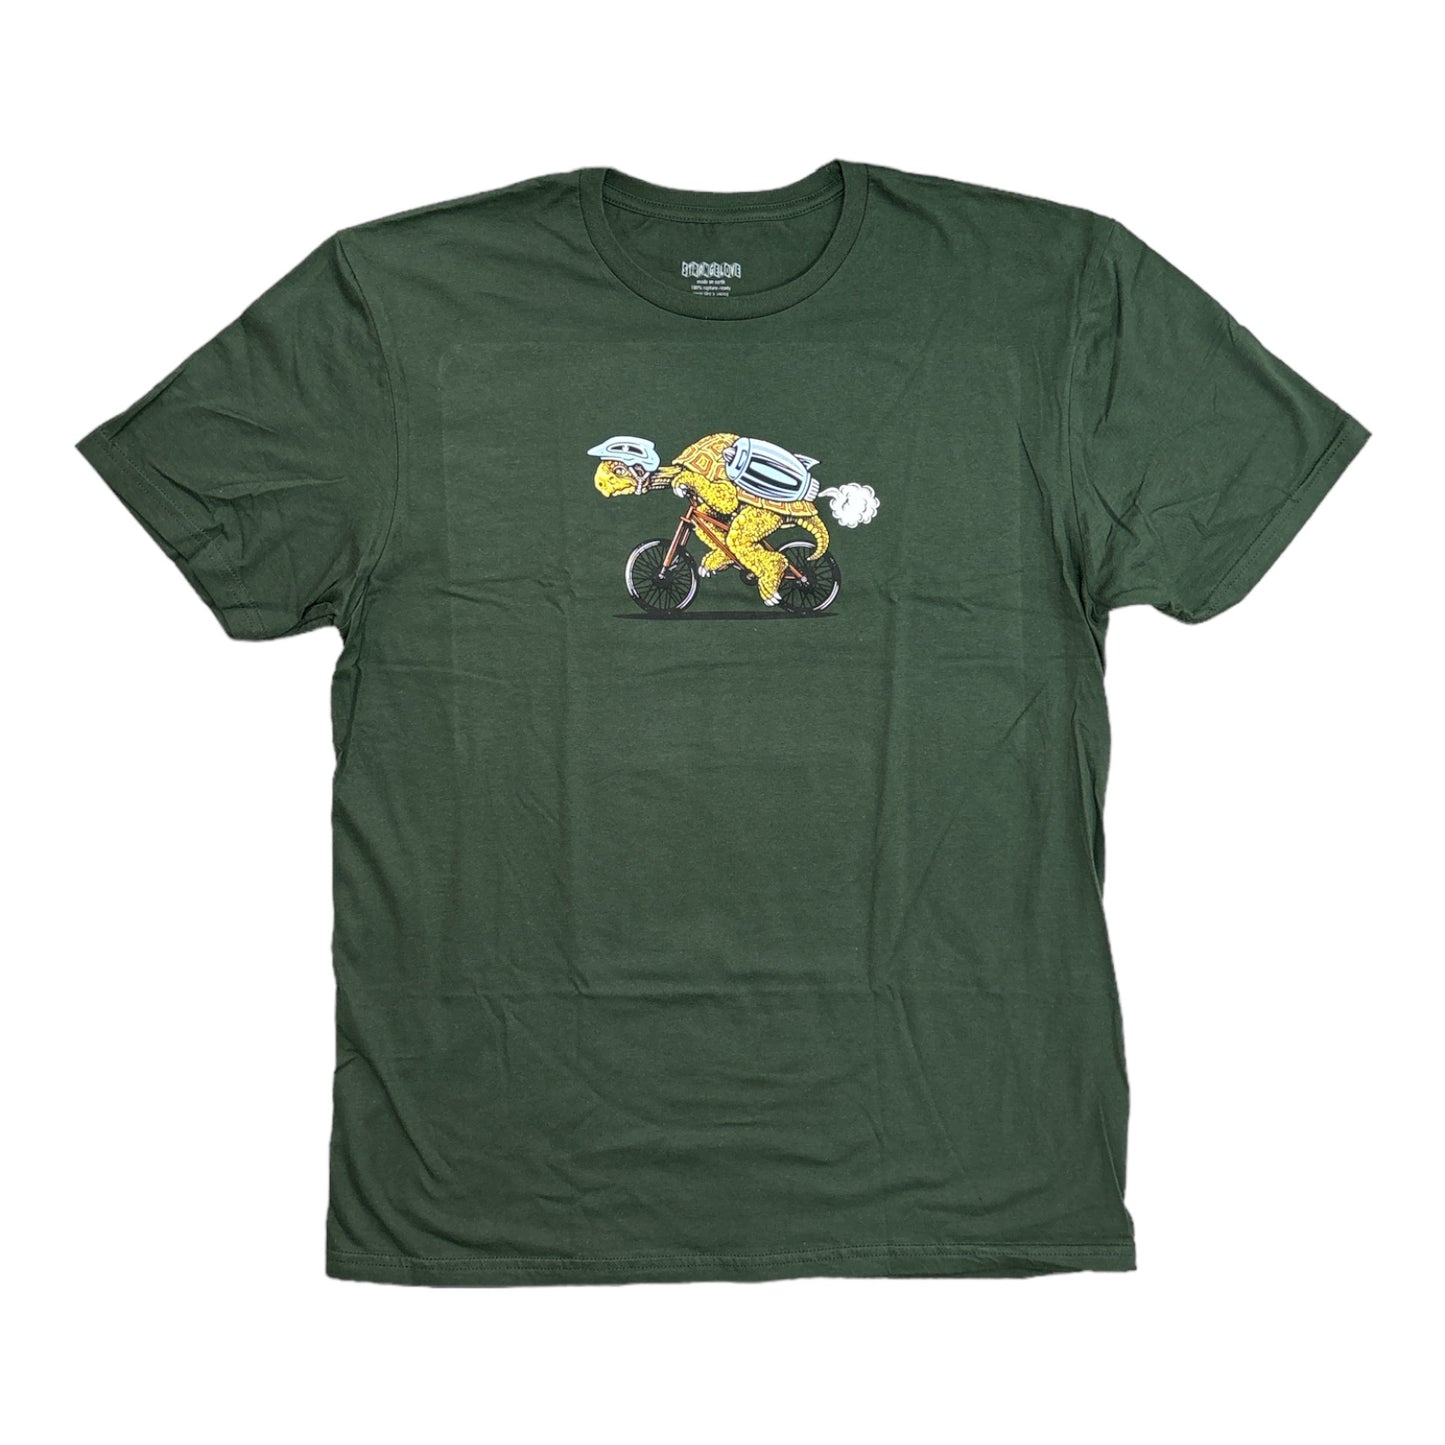 Green tee with picture of turtle on a bike